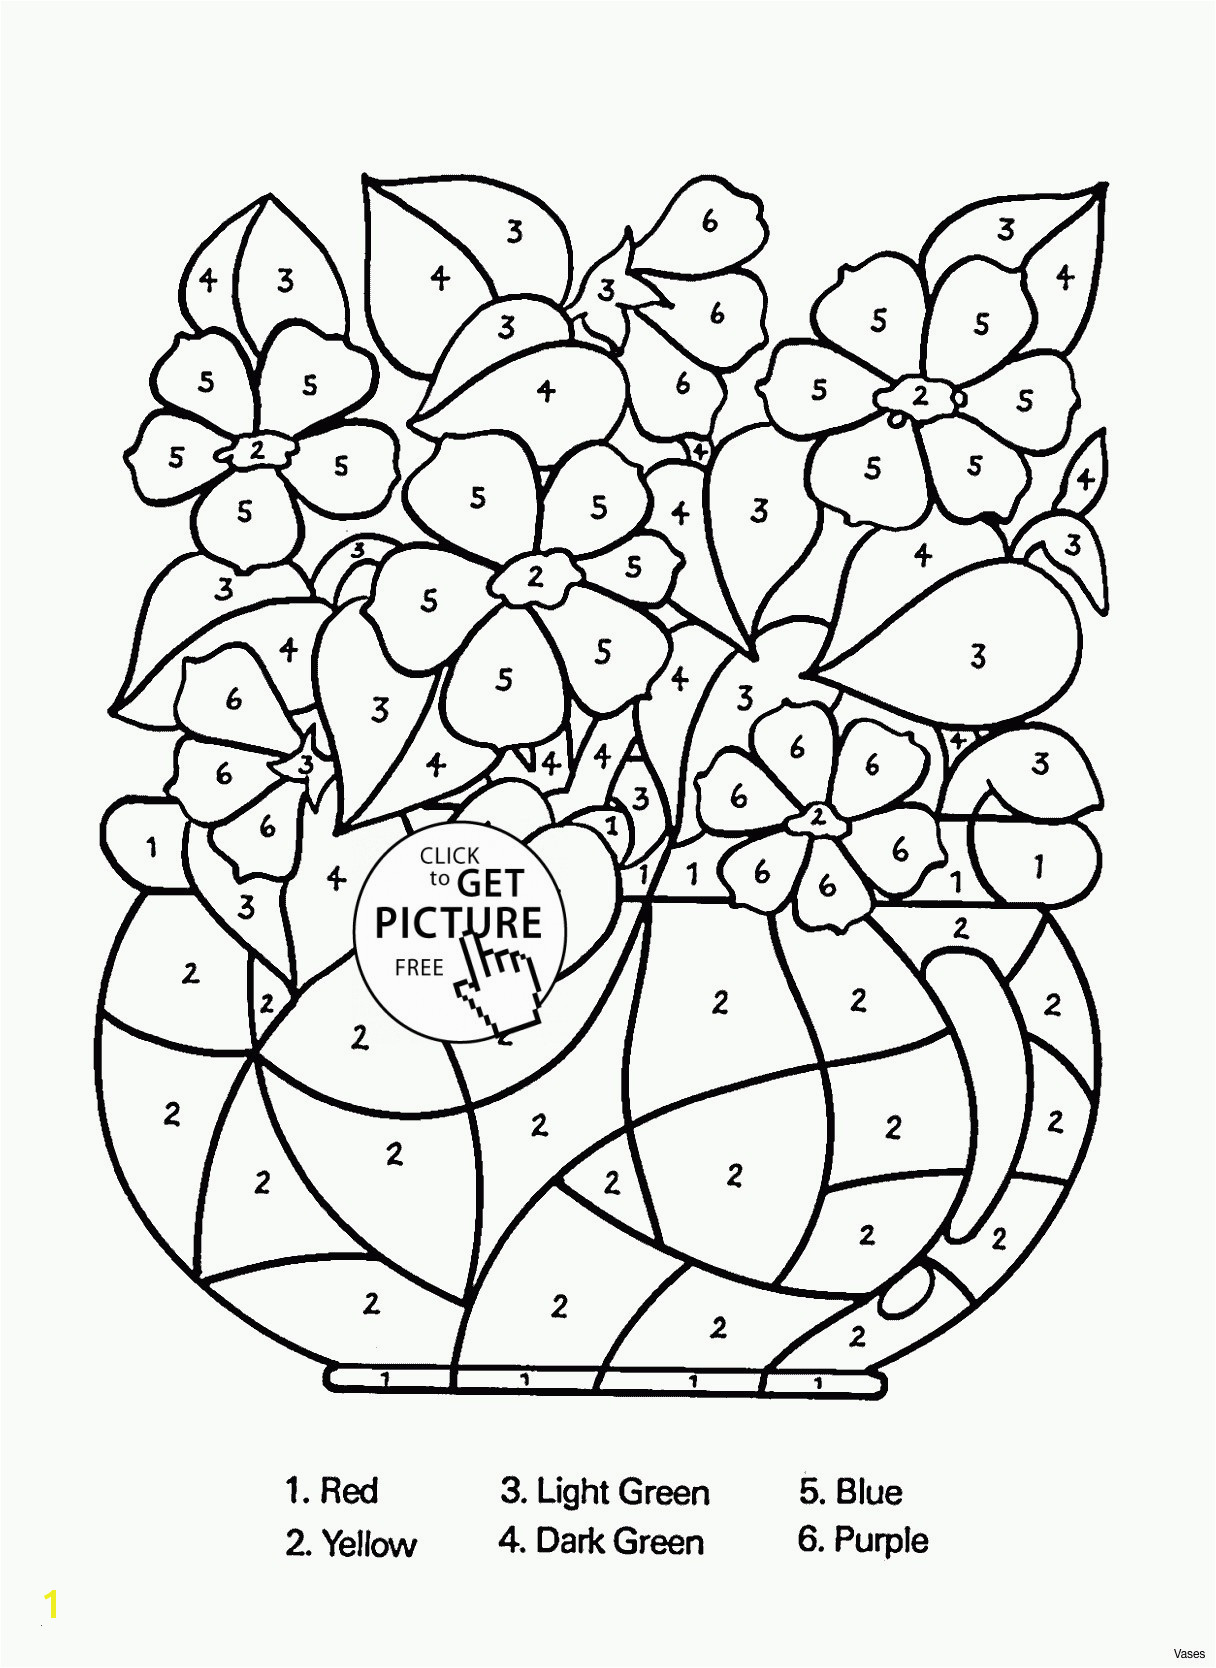 Coloring Pages for Spring Spring Coloring Pages Printable Luxury Spring Coloring Pages New